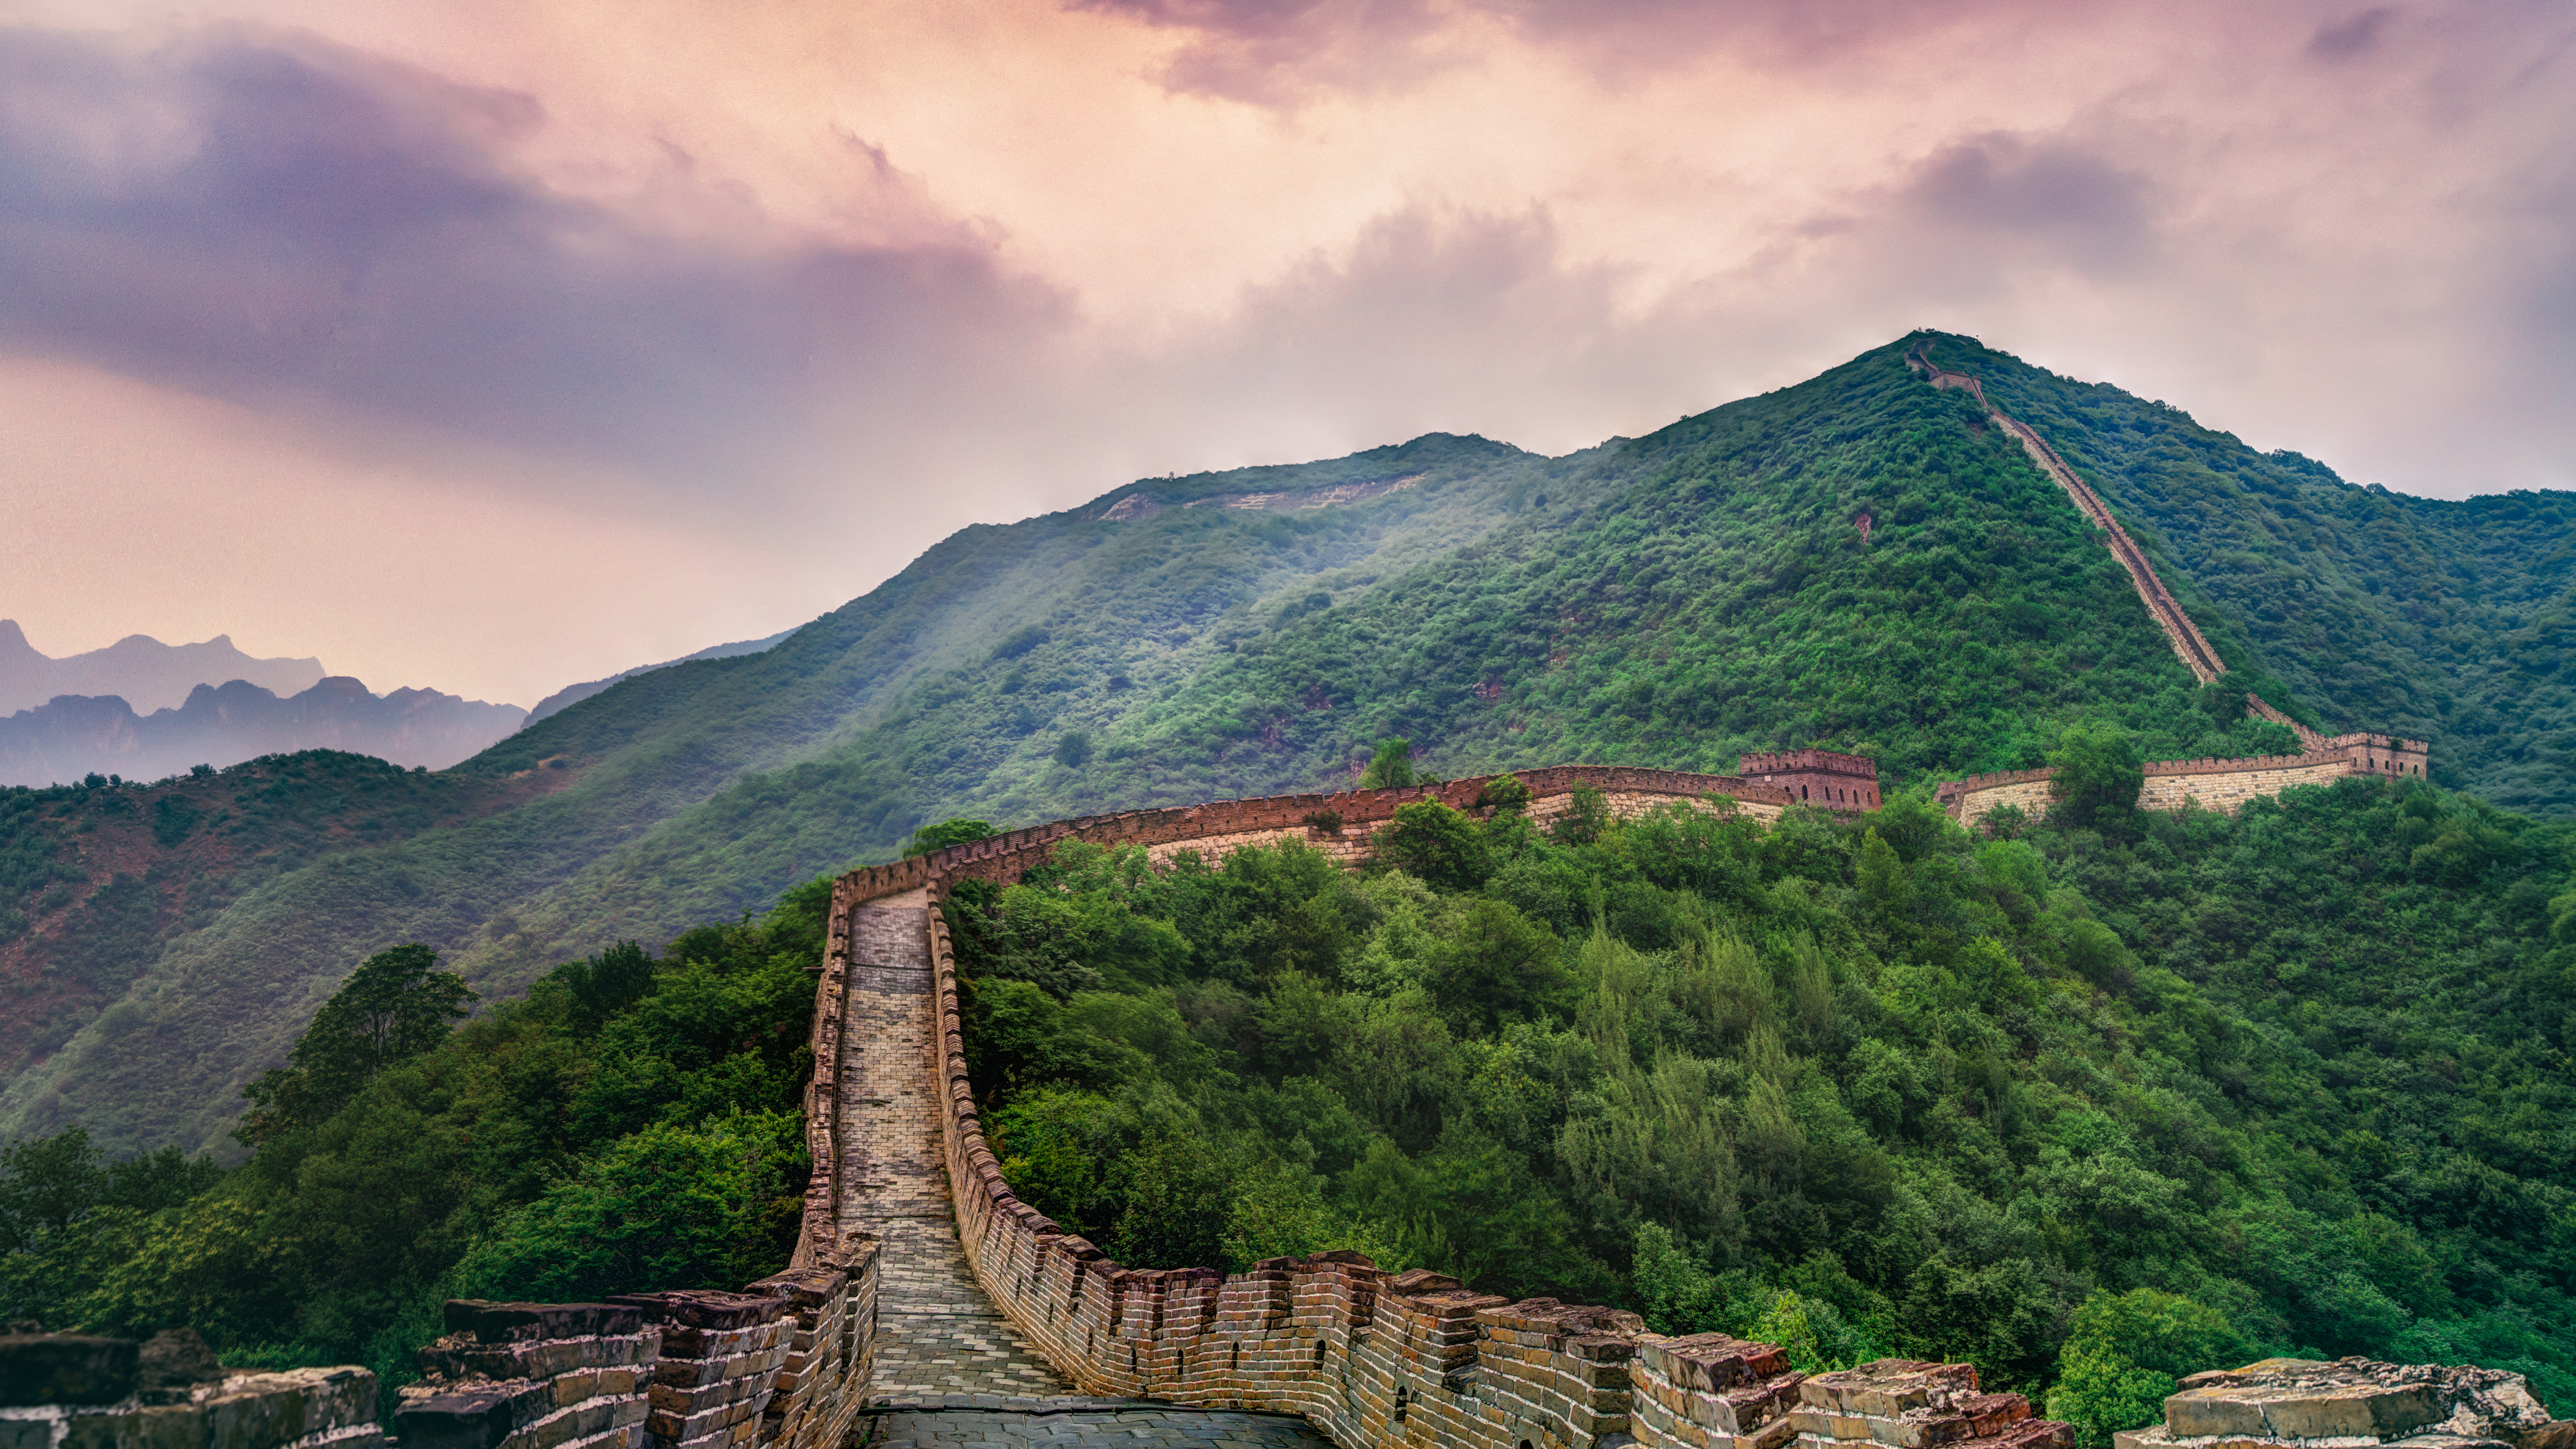 General 7680x4320 Trey Ratcliff photography China Beijing Great Wall of China